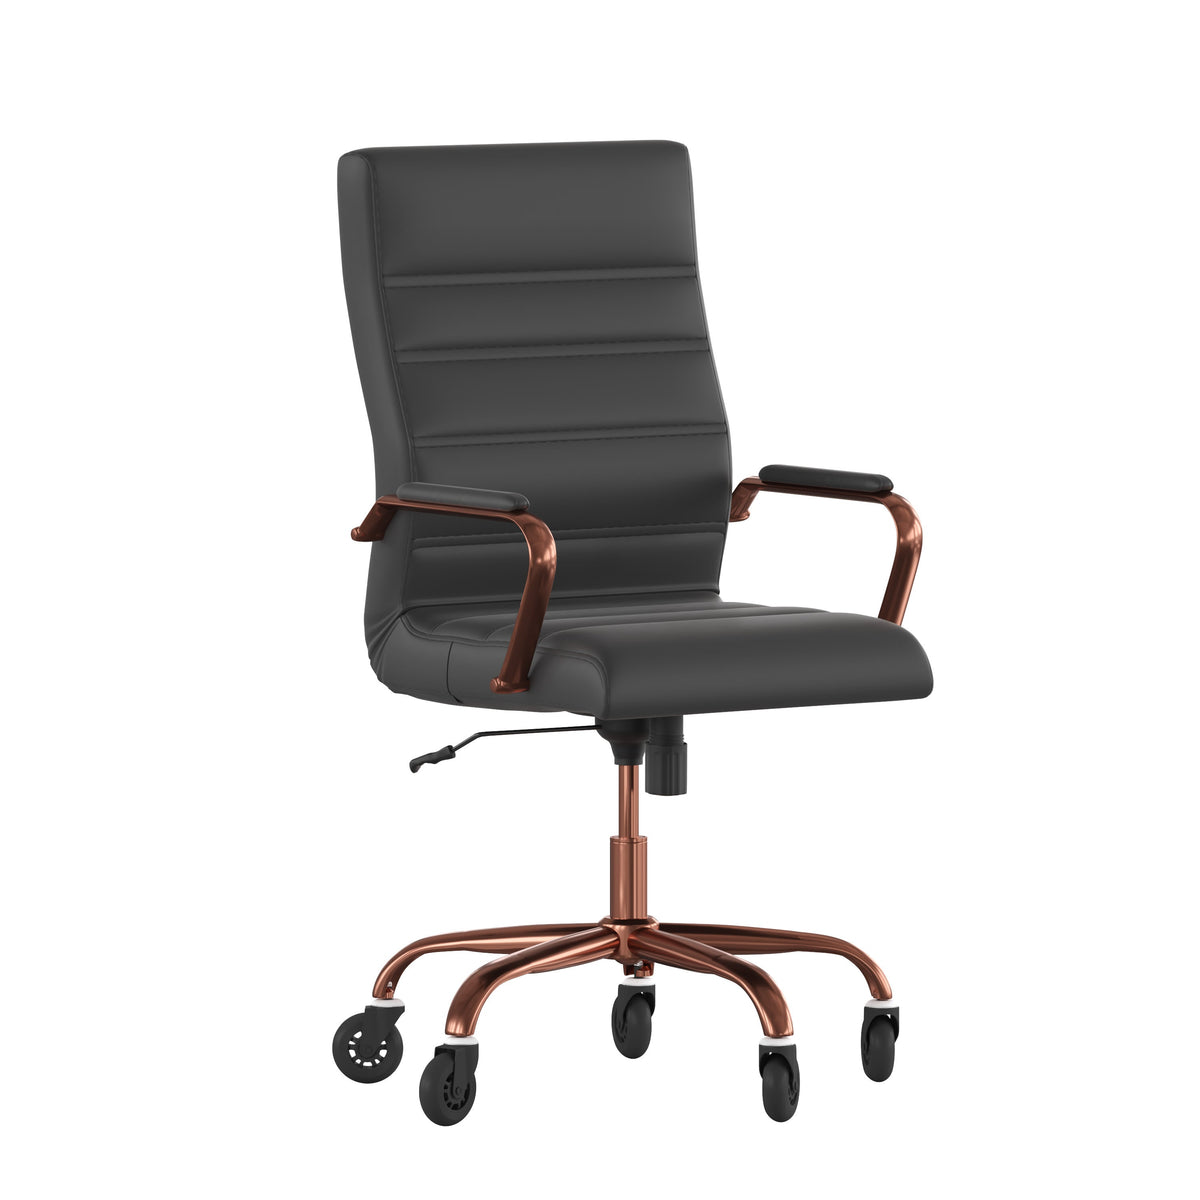 Black LeatherSoft/Rose Gold Frame |#| Executive Chair with Rose Gold Frame & Arms on Skate Wheels - Black LeatherSoft